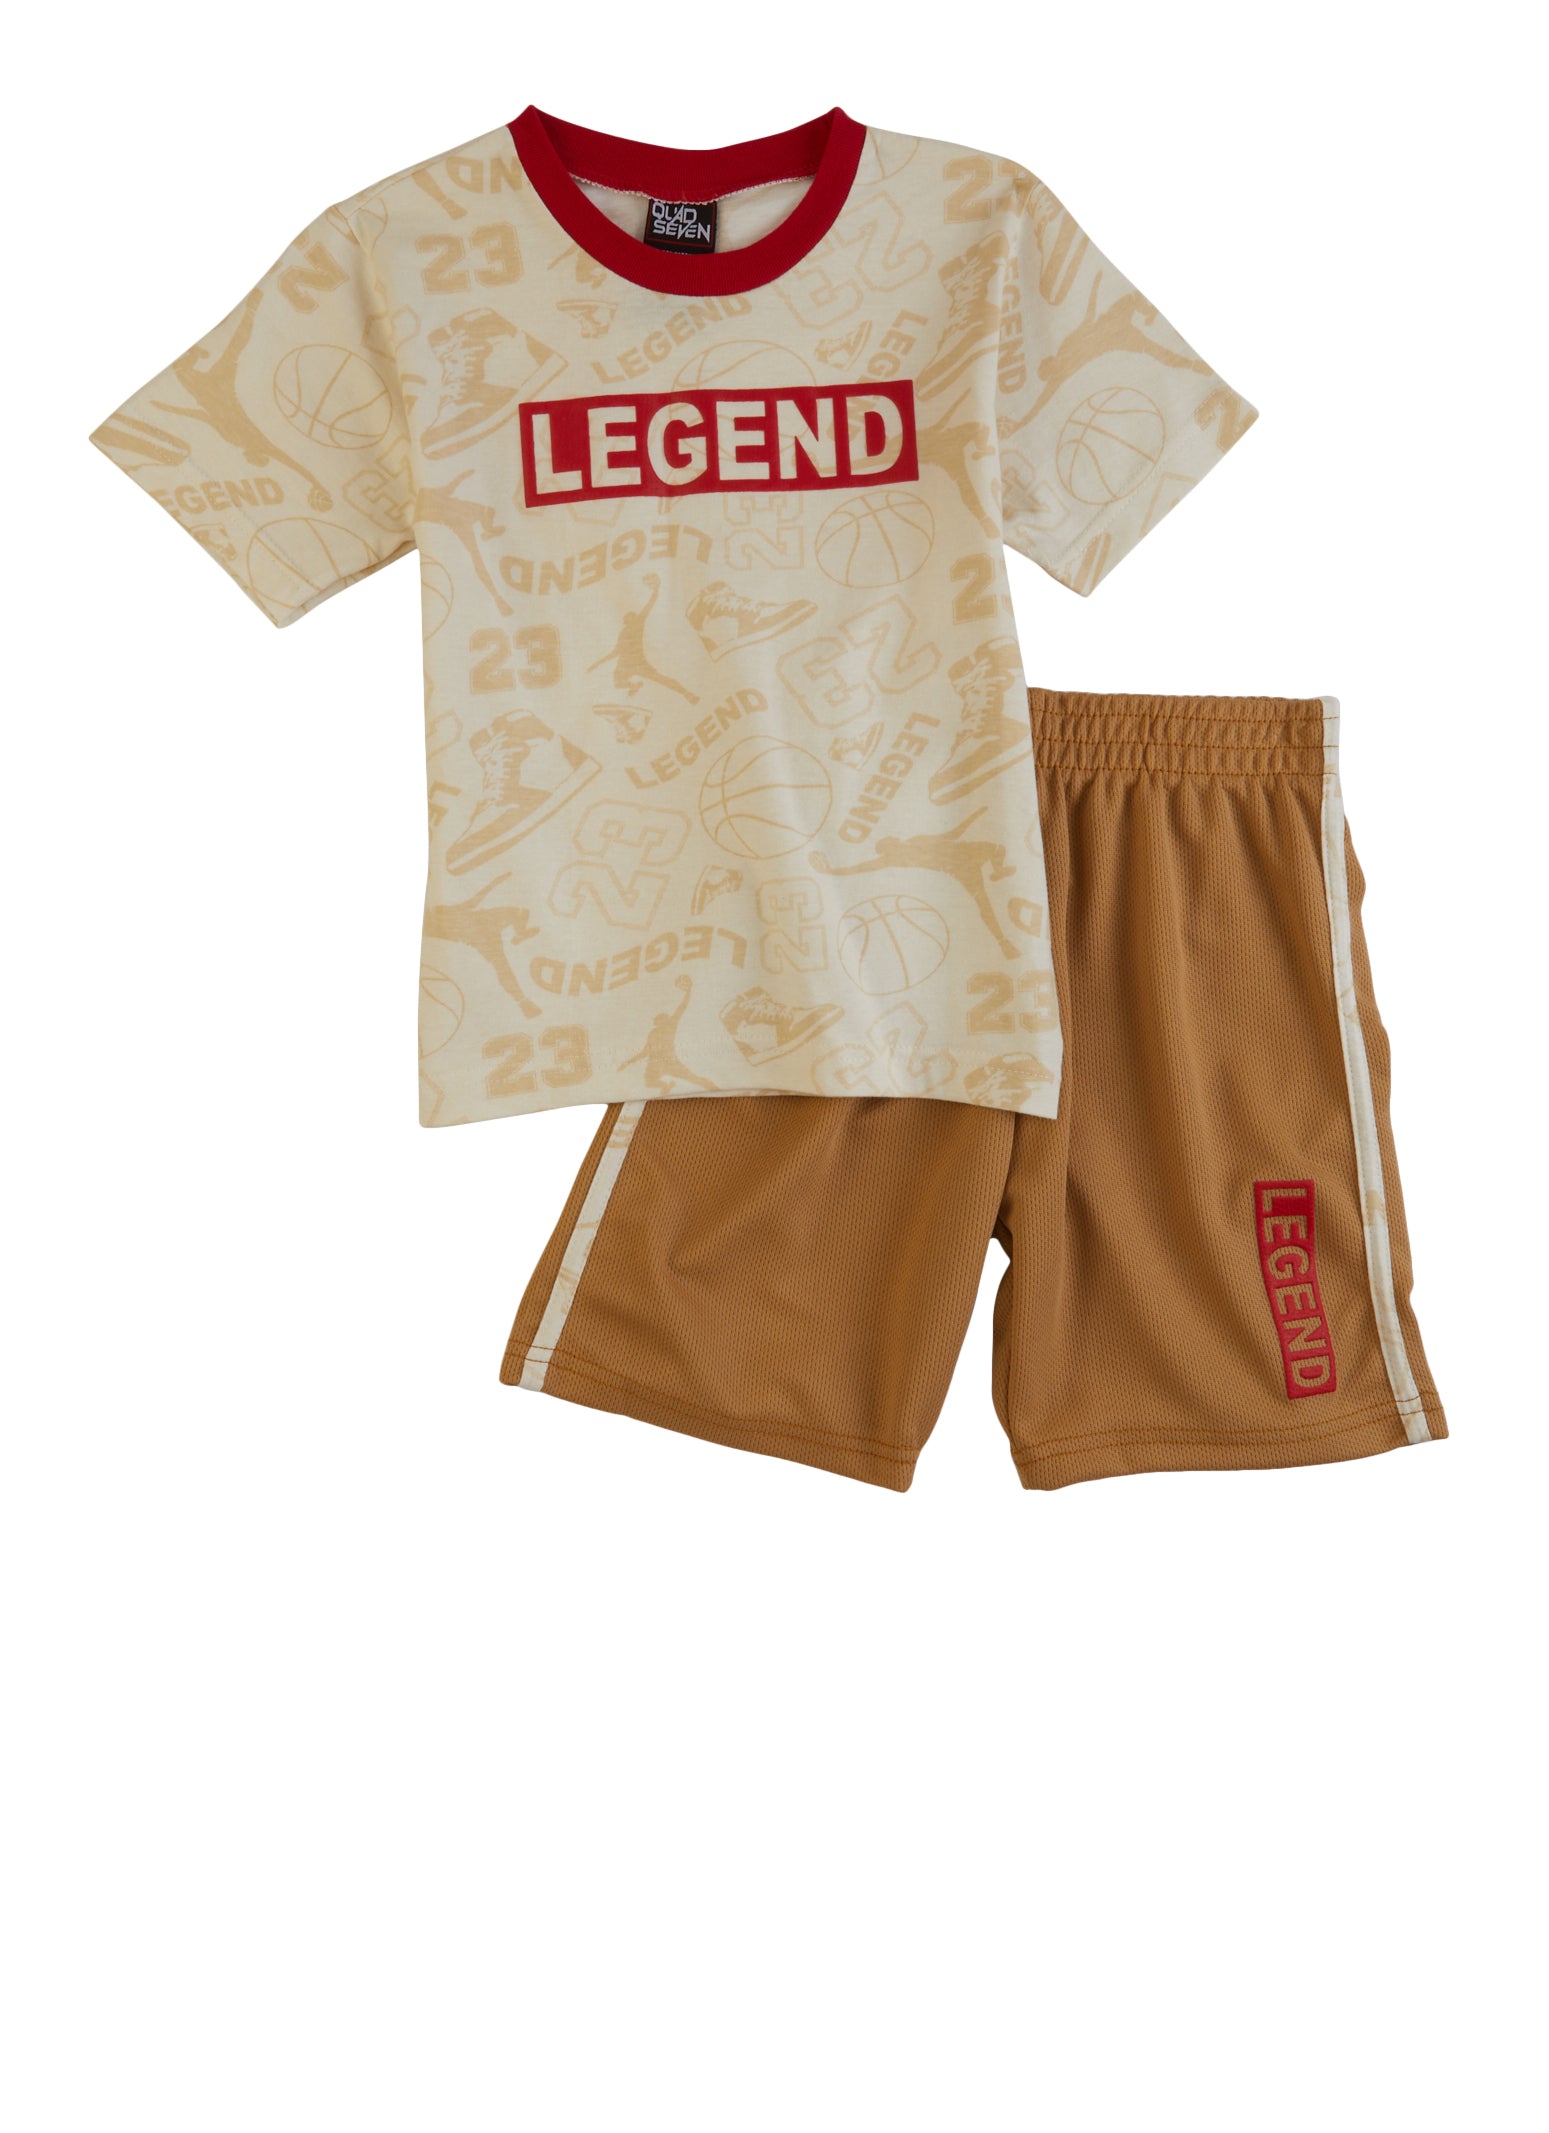 Little Boys Legend Graphic Tee and Basketball Shorts, Beige, Size 5-6